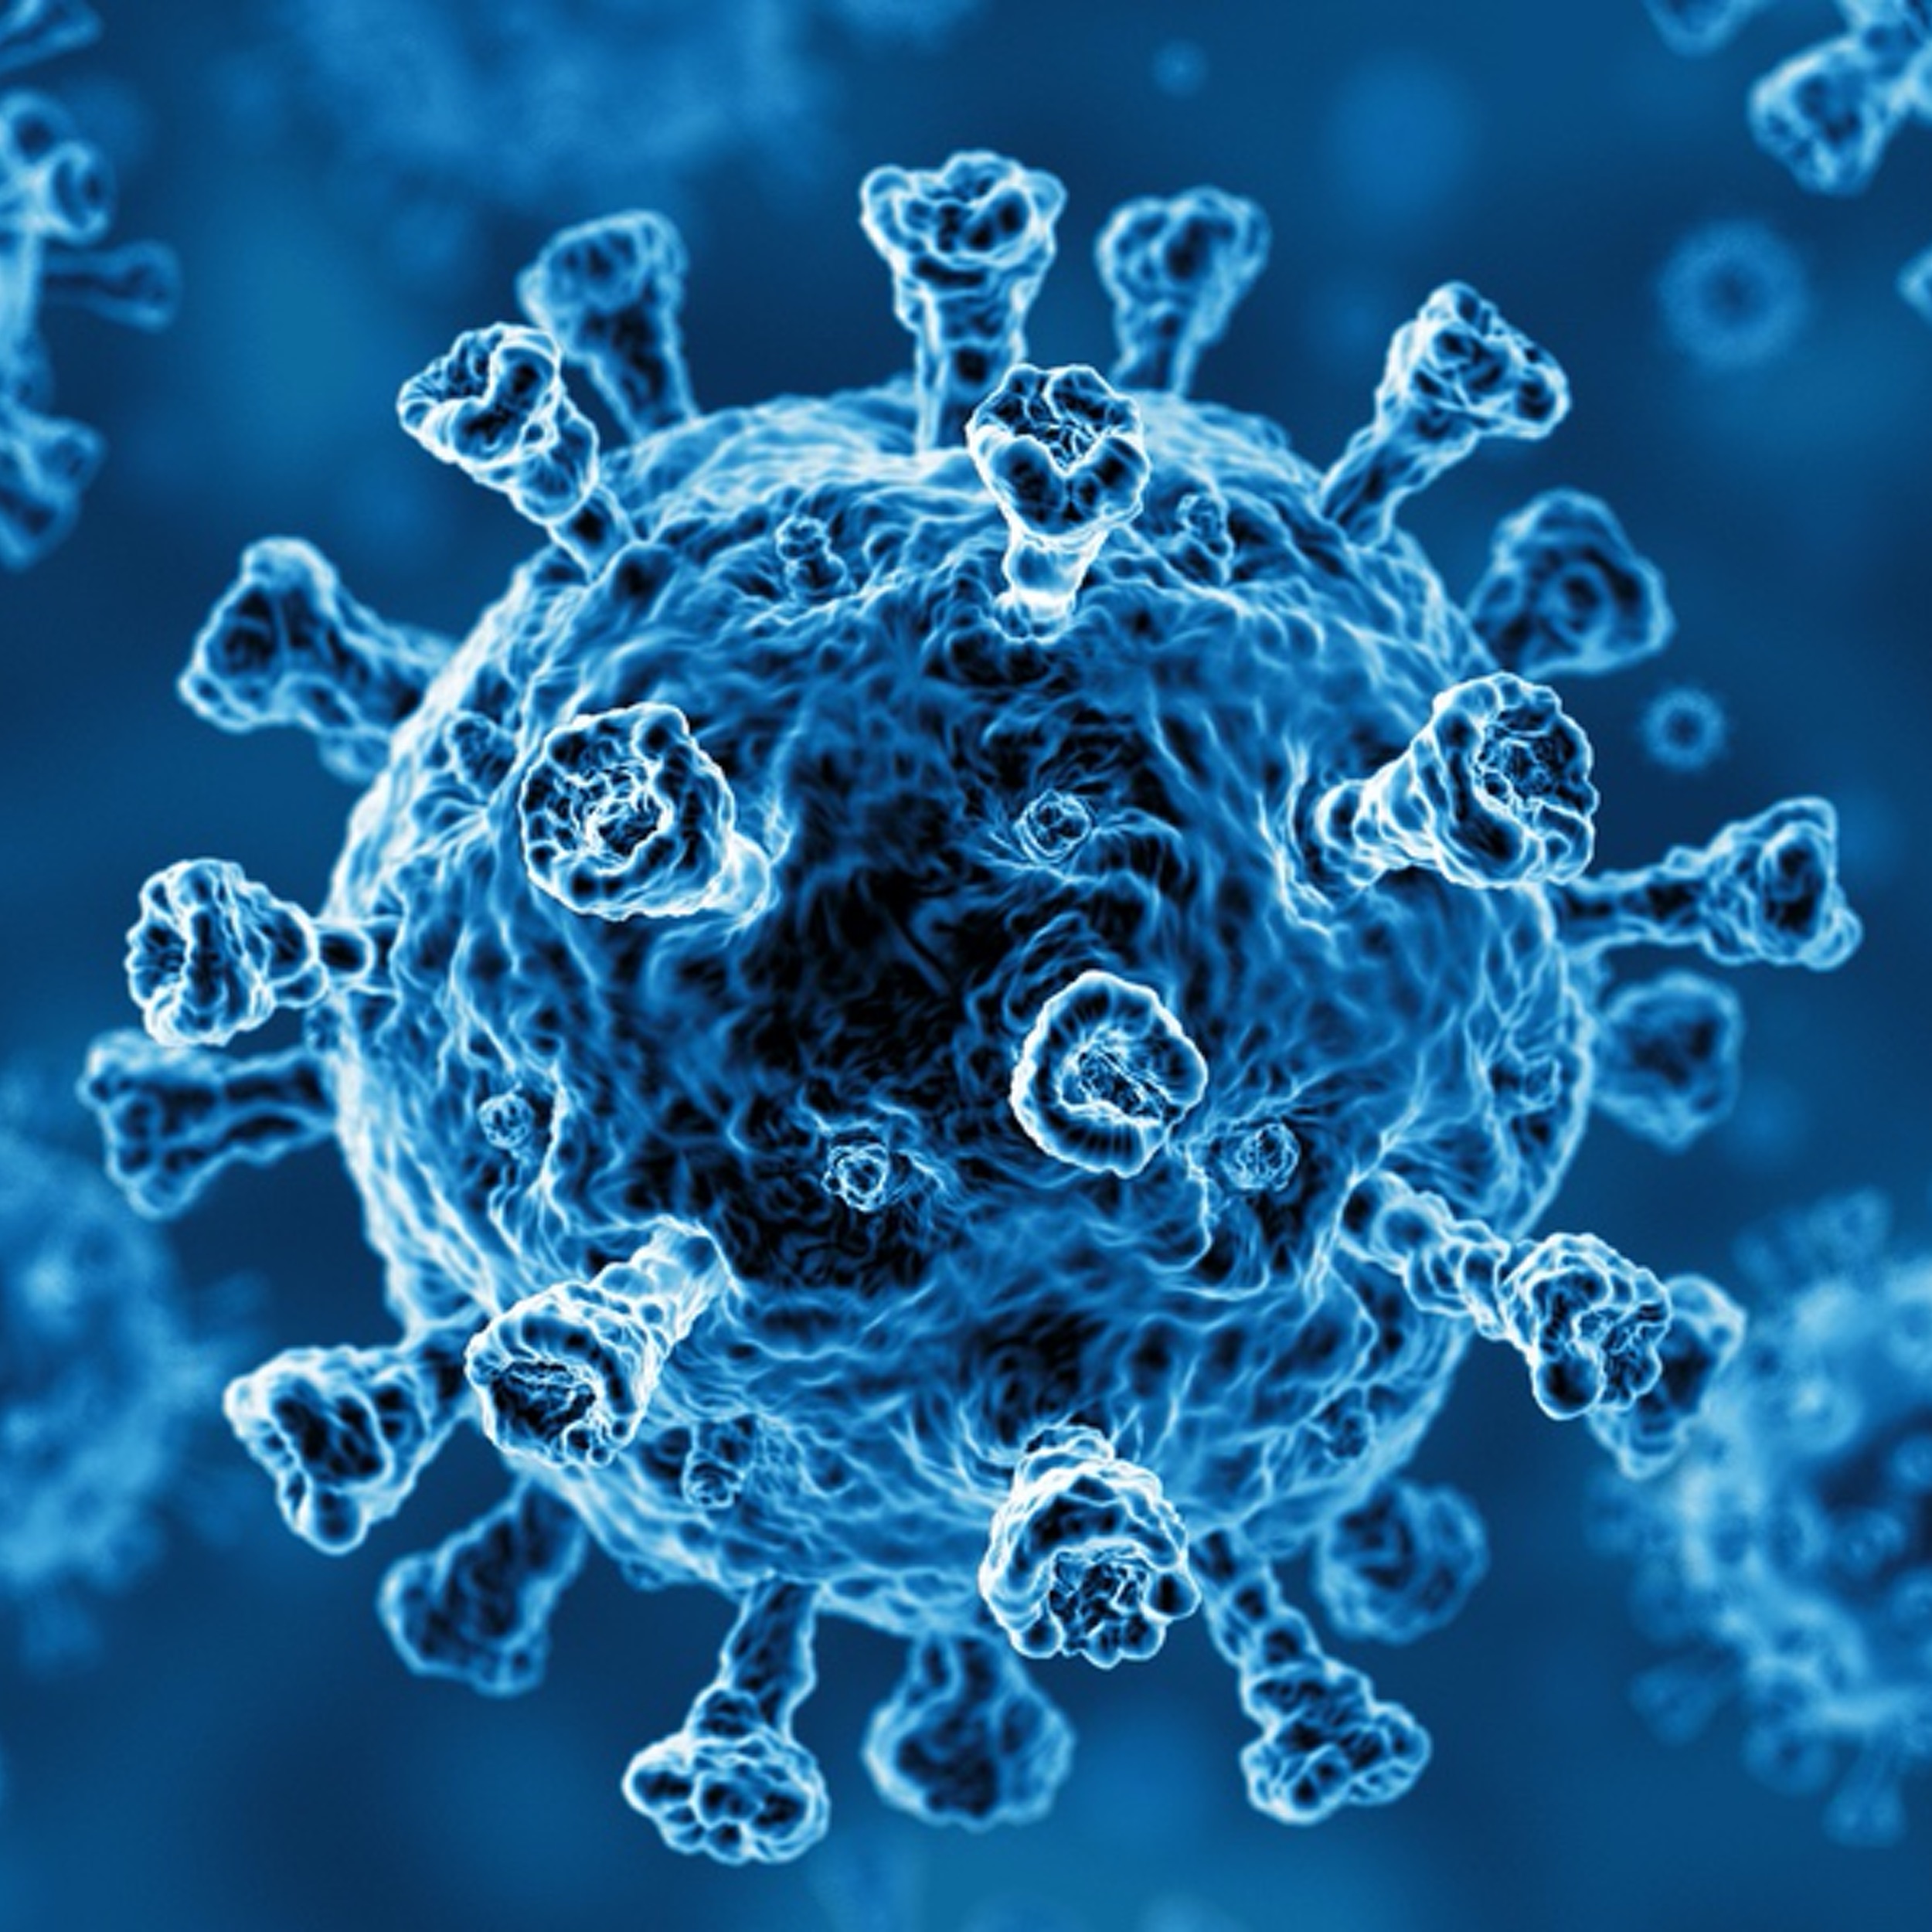 Magnified photo of a covid-19 virus